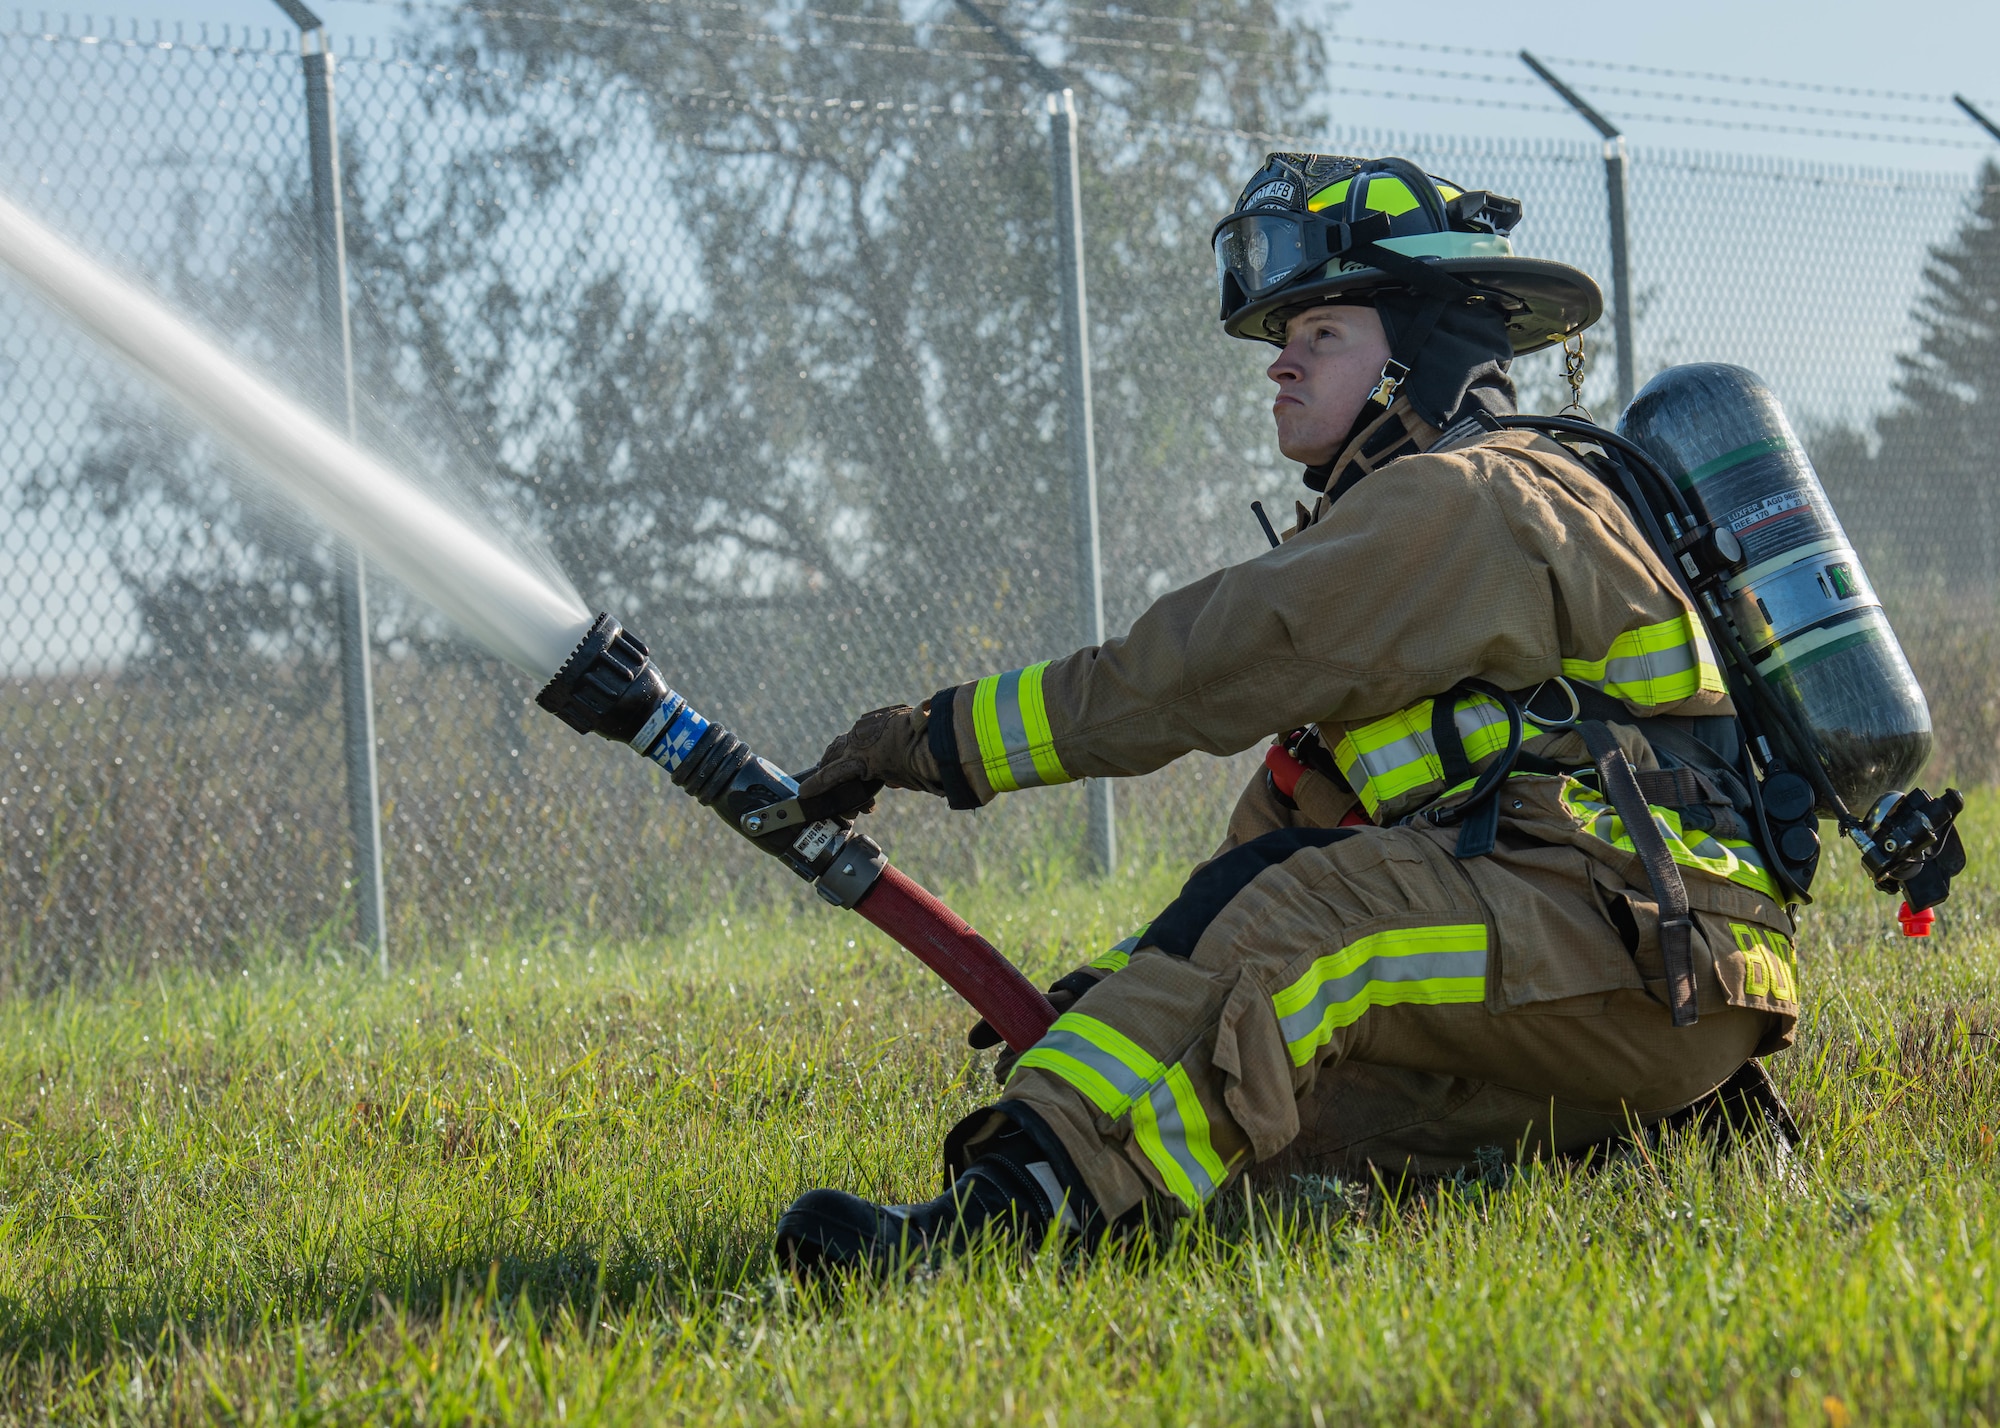 Airman 1st Class Cole Burchfield, 5th Civil Engineer Squadron firefighter, discharges a fire hose during a National Fire Protection Association 1410 drill at Minot Air Force Base, North Dakota, Oct. 4, 2023. Burchfield worked in tandem with his fellow firefighters to successfully and efficiently complete all components of the drill. (U.S. Air Force photo by Airman 1st Class Kyle Wilson)